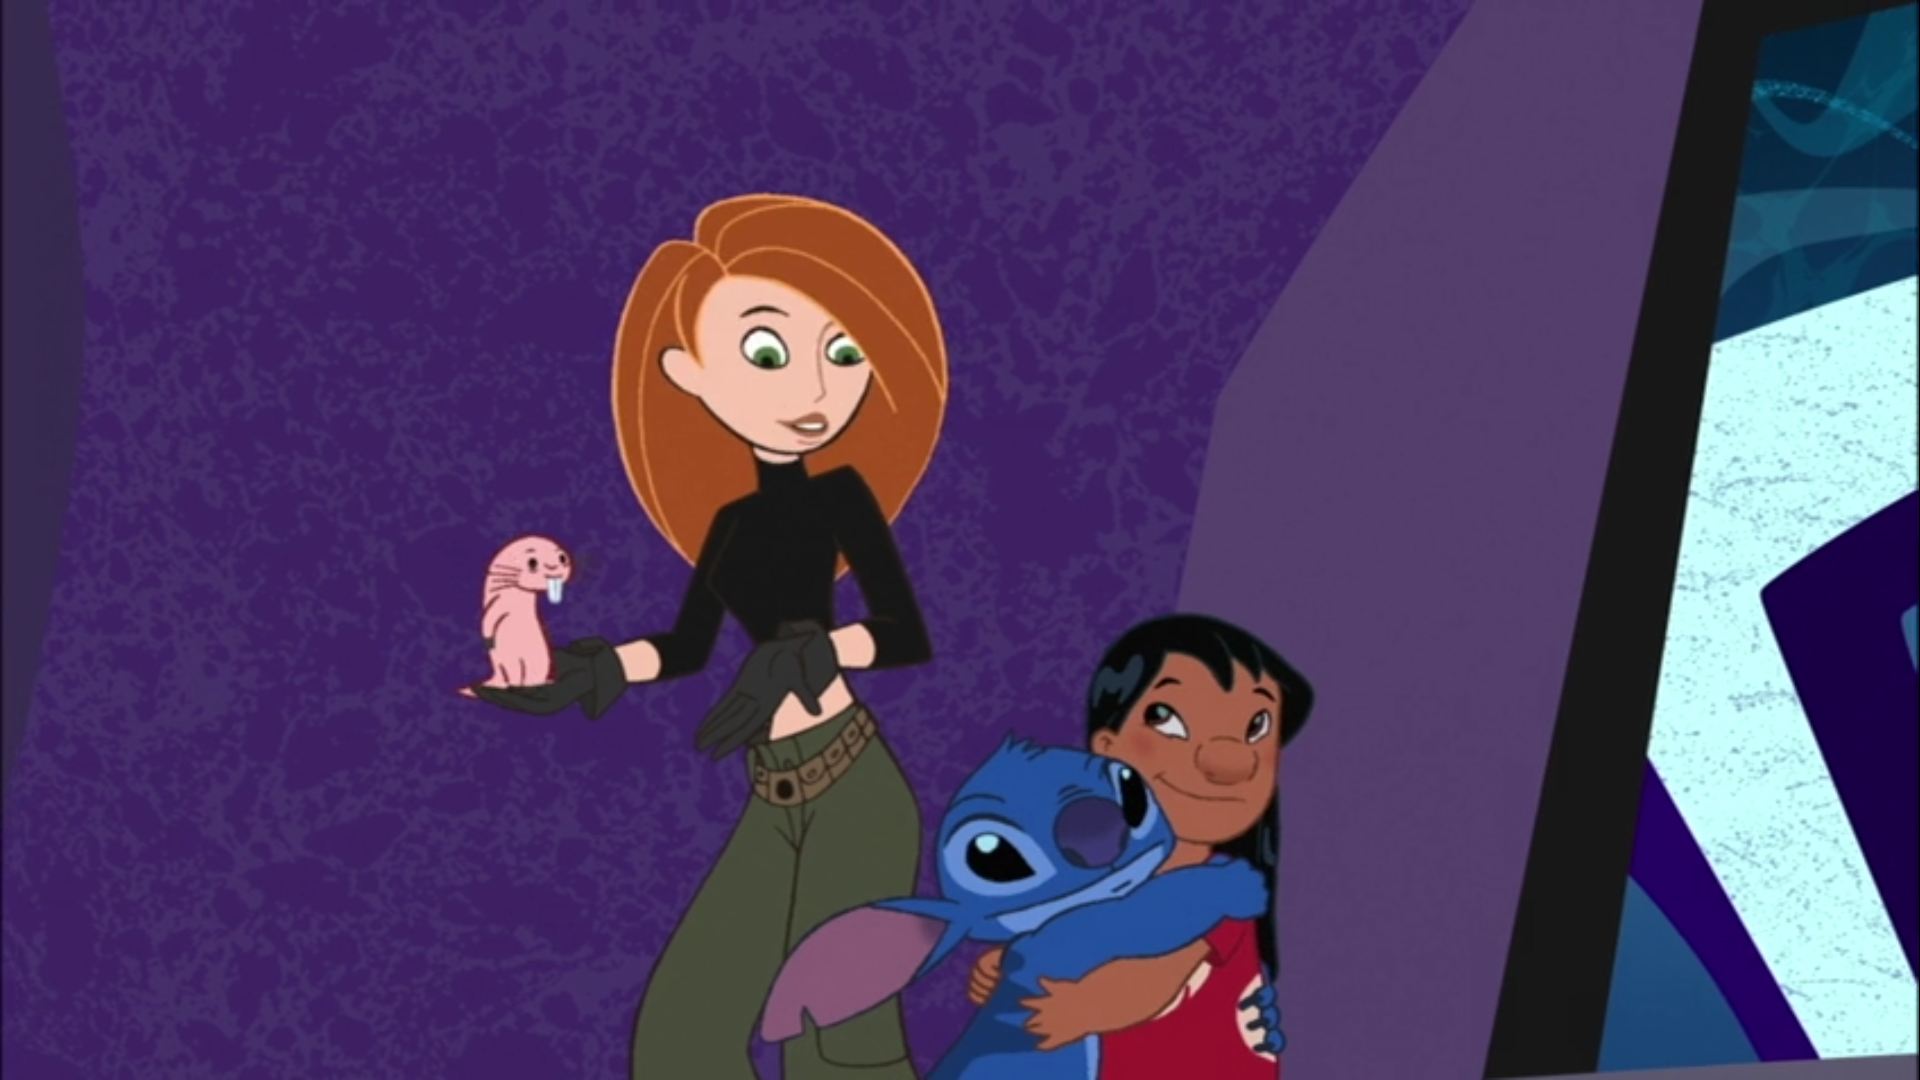 Kim with her naked mole rat Rufus and Lilo with the iconic alien Stitch